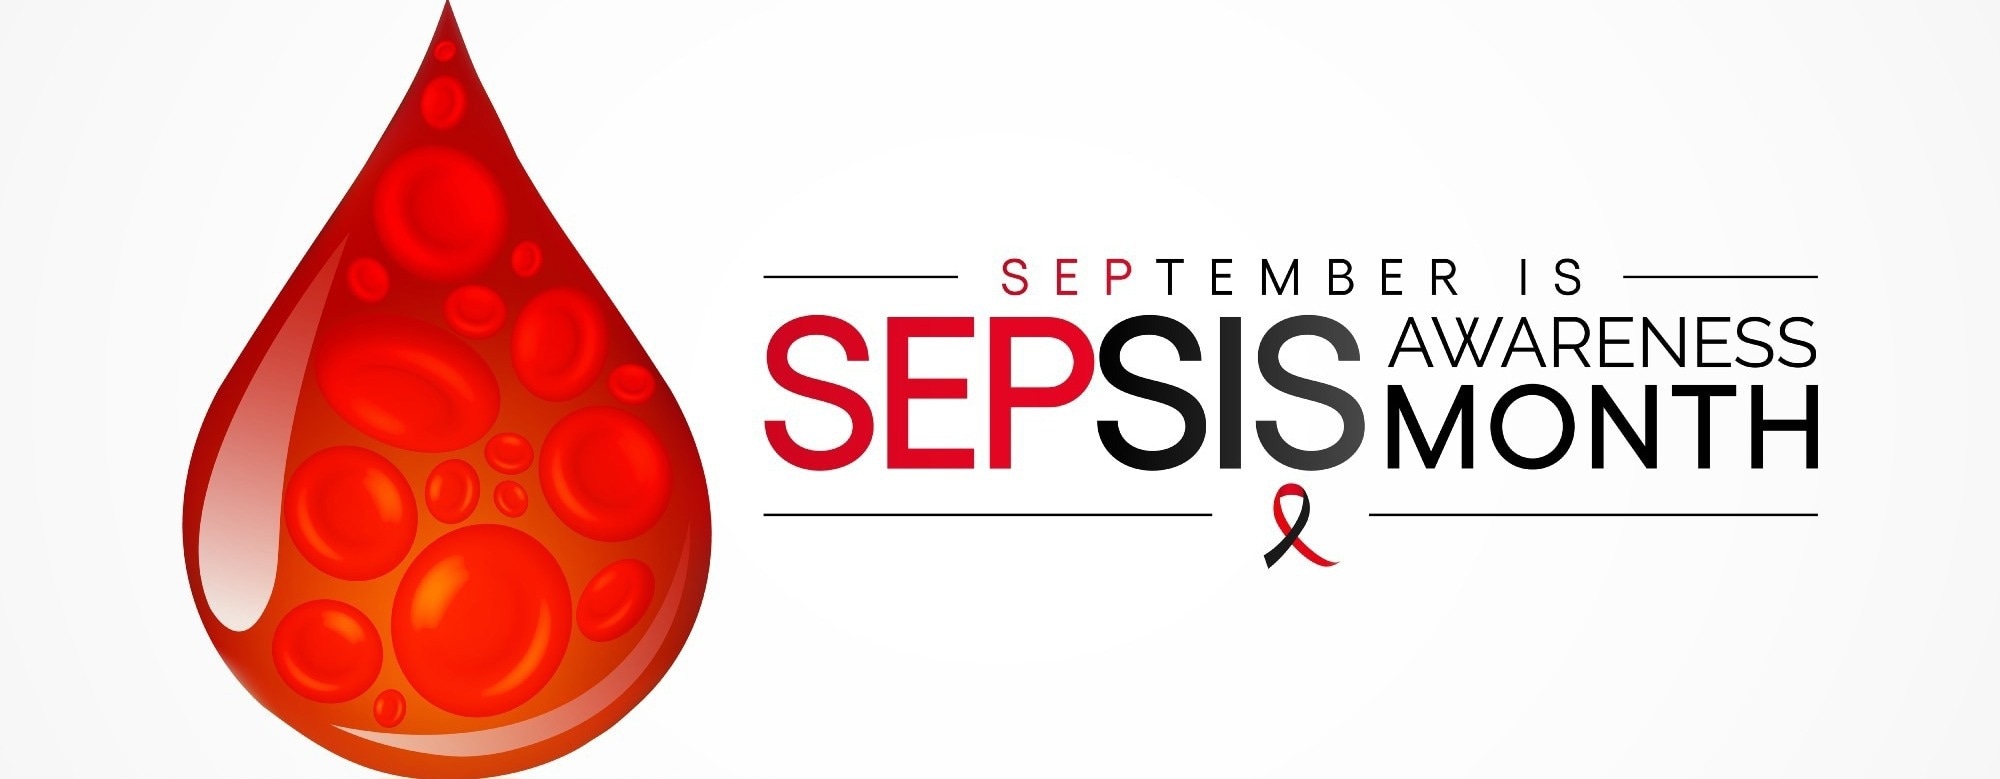 World Sepsis Month: Increasing Sepsis Awareness, Patient Support, and Improving Survivor Outcomes